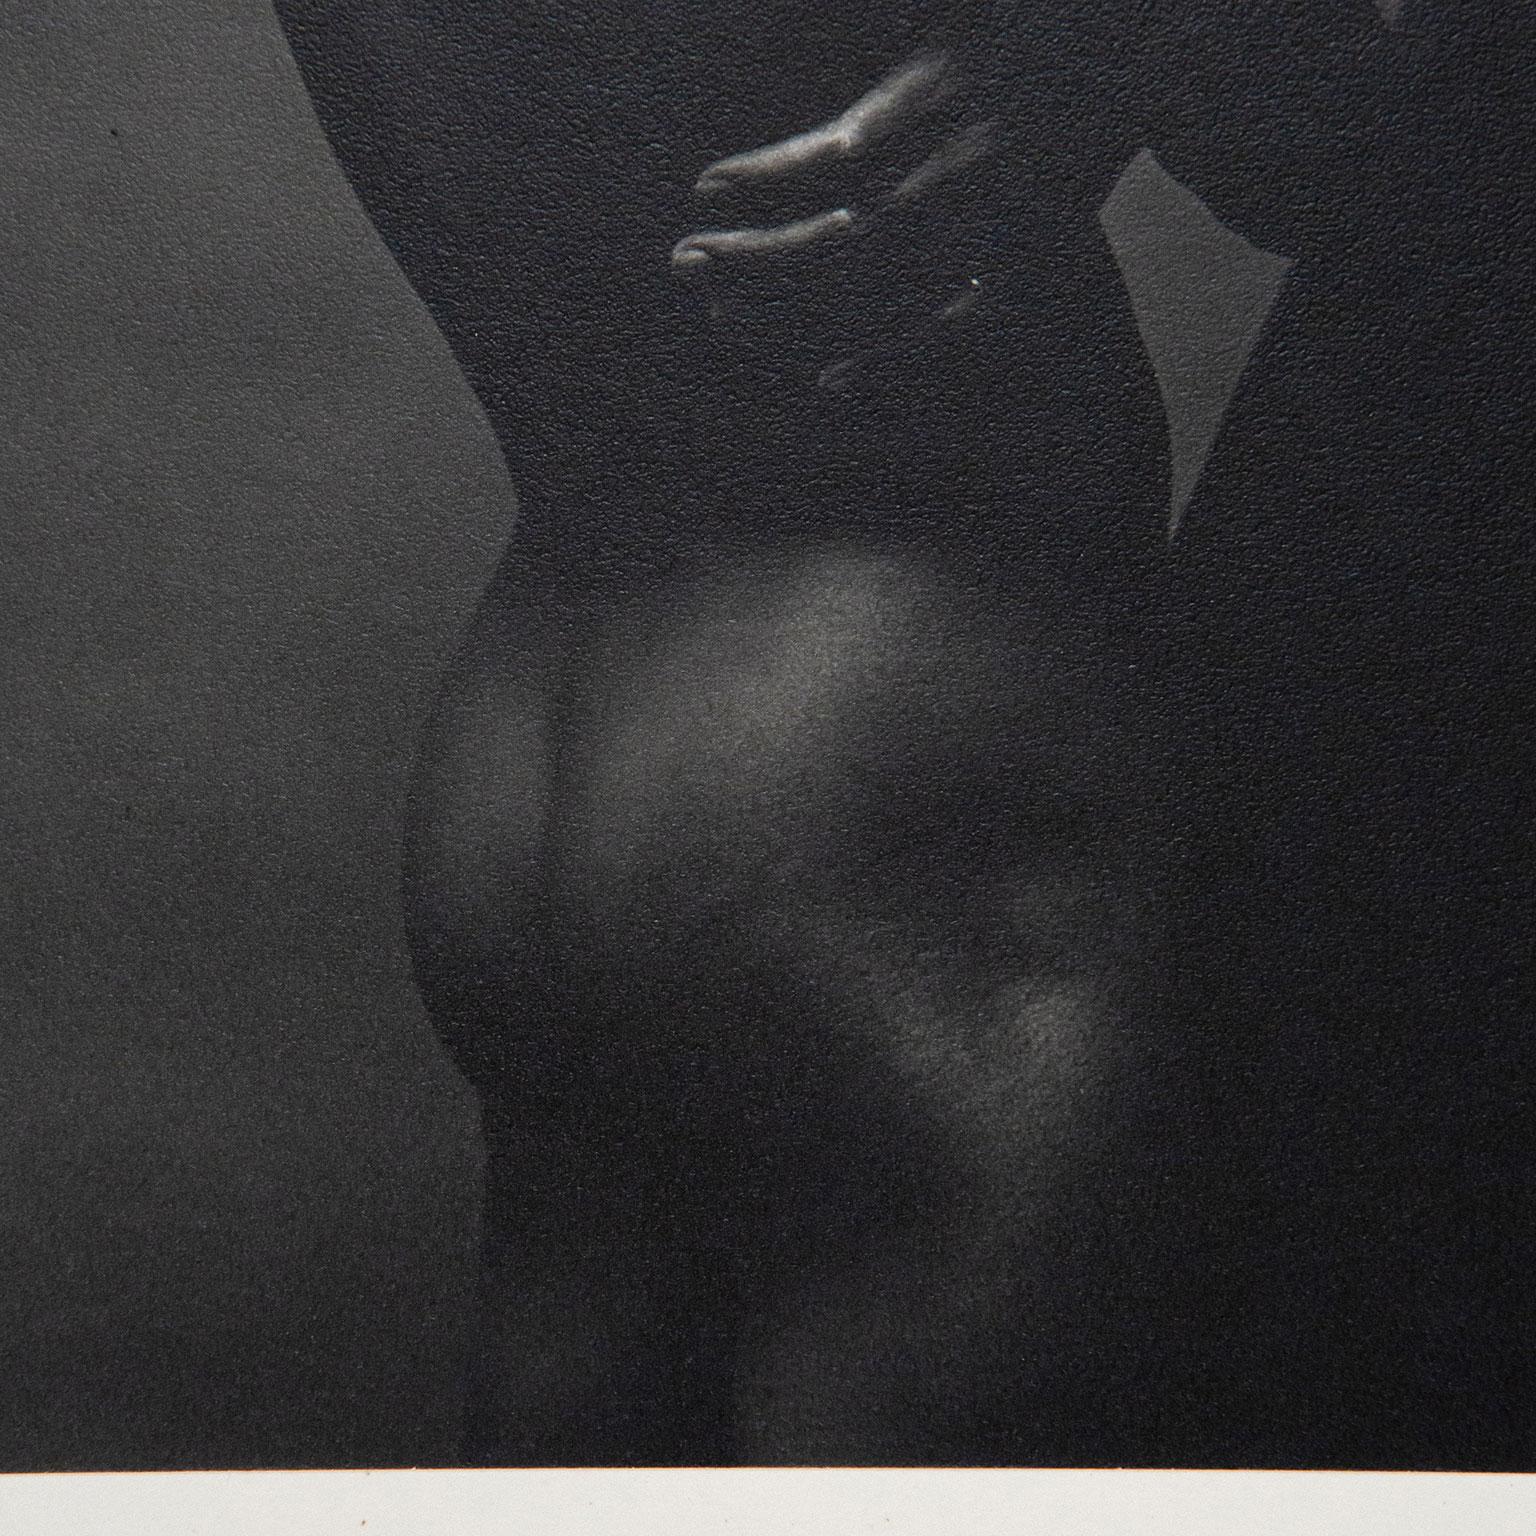 LEIGH LEE / THE Z PORTFOLIO - Gray Black and White Photograph by Robert Mapplethorpe